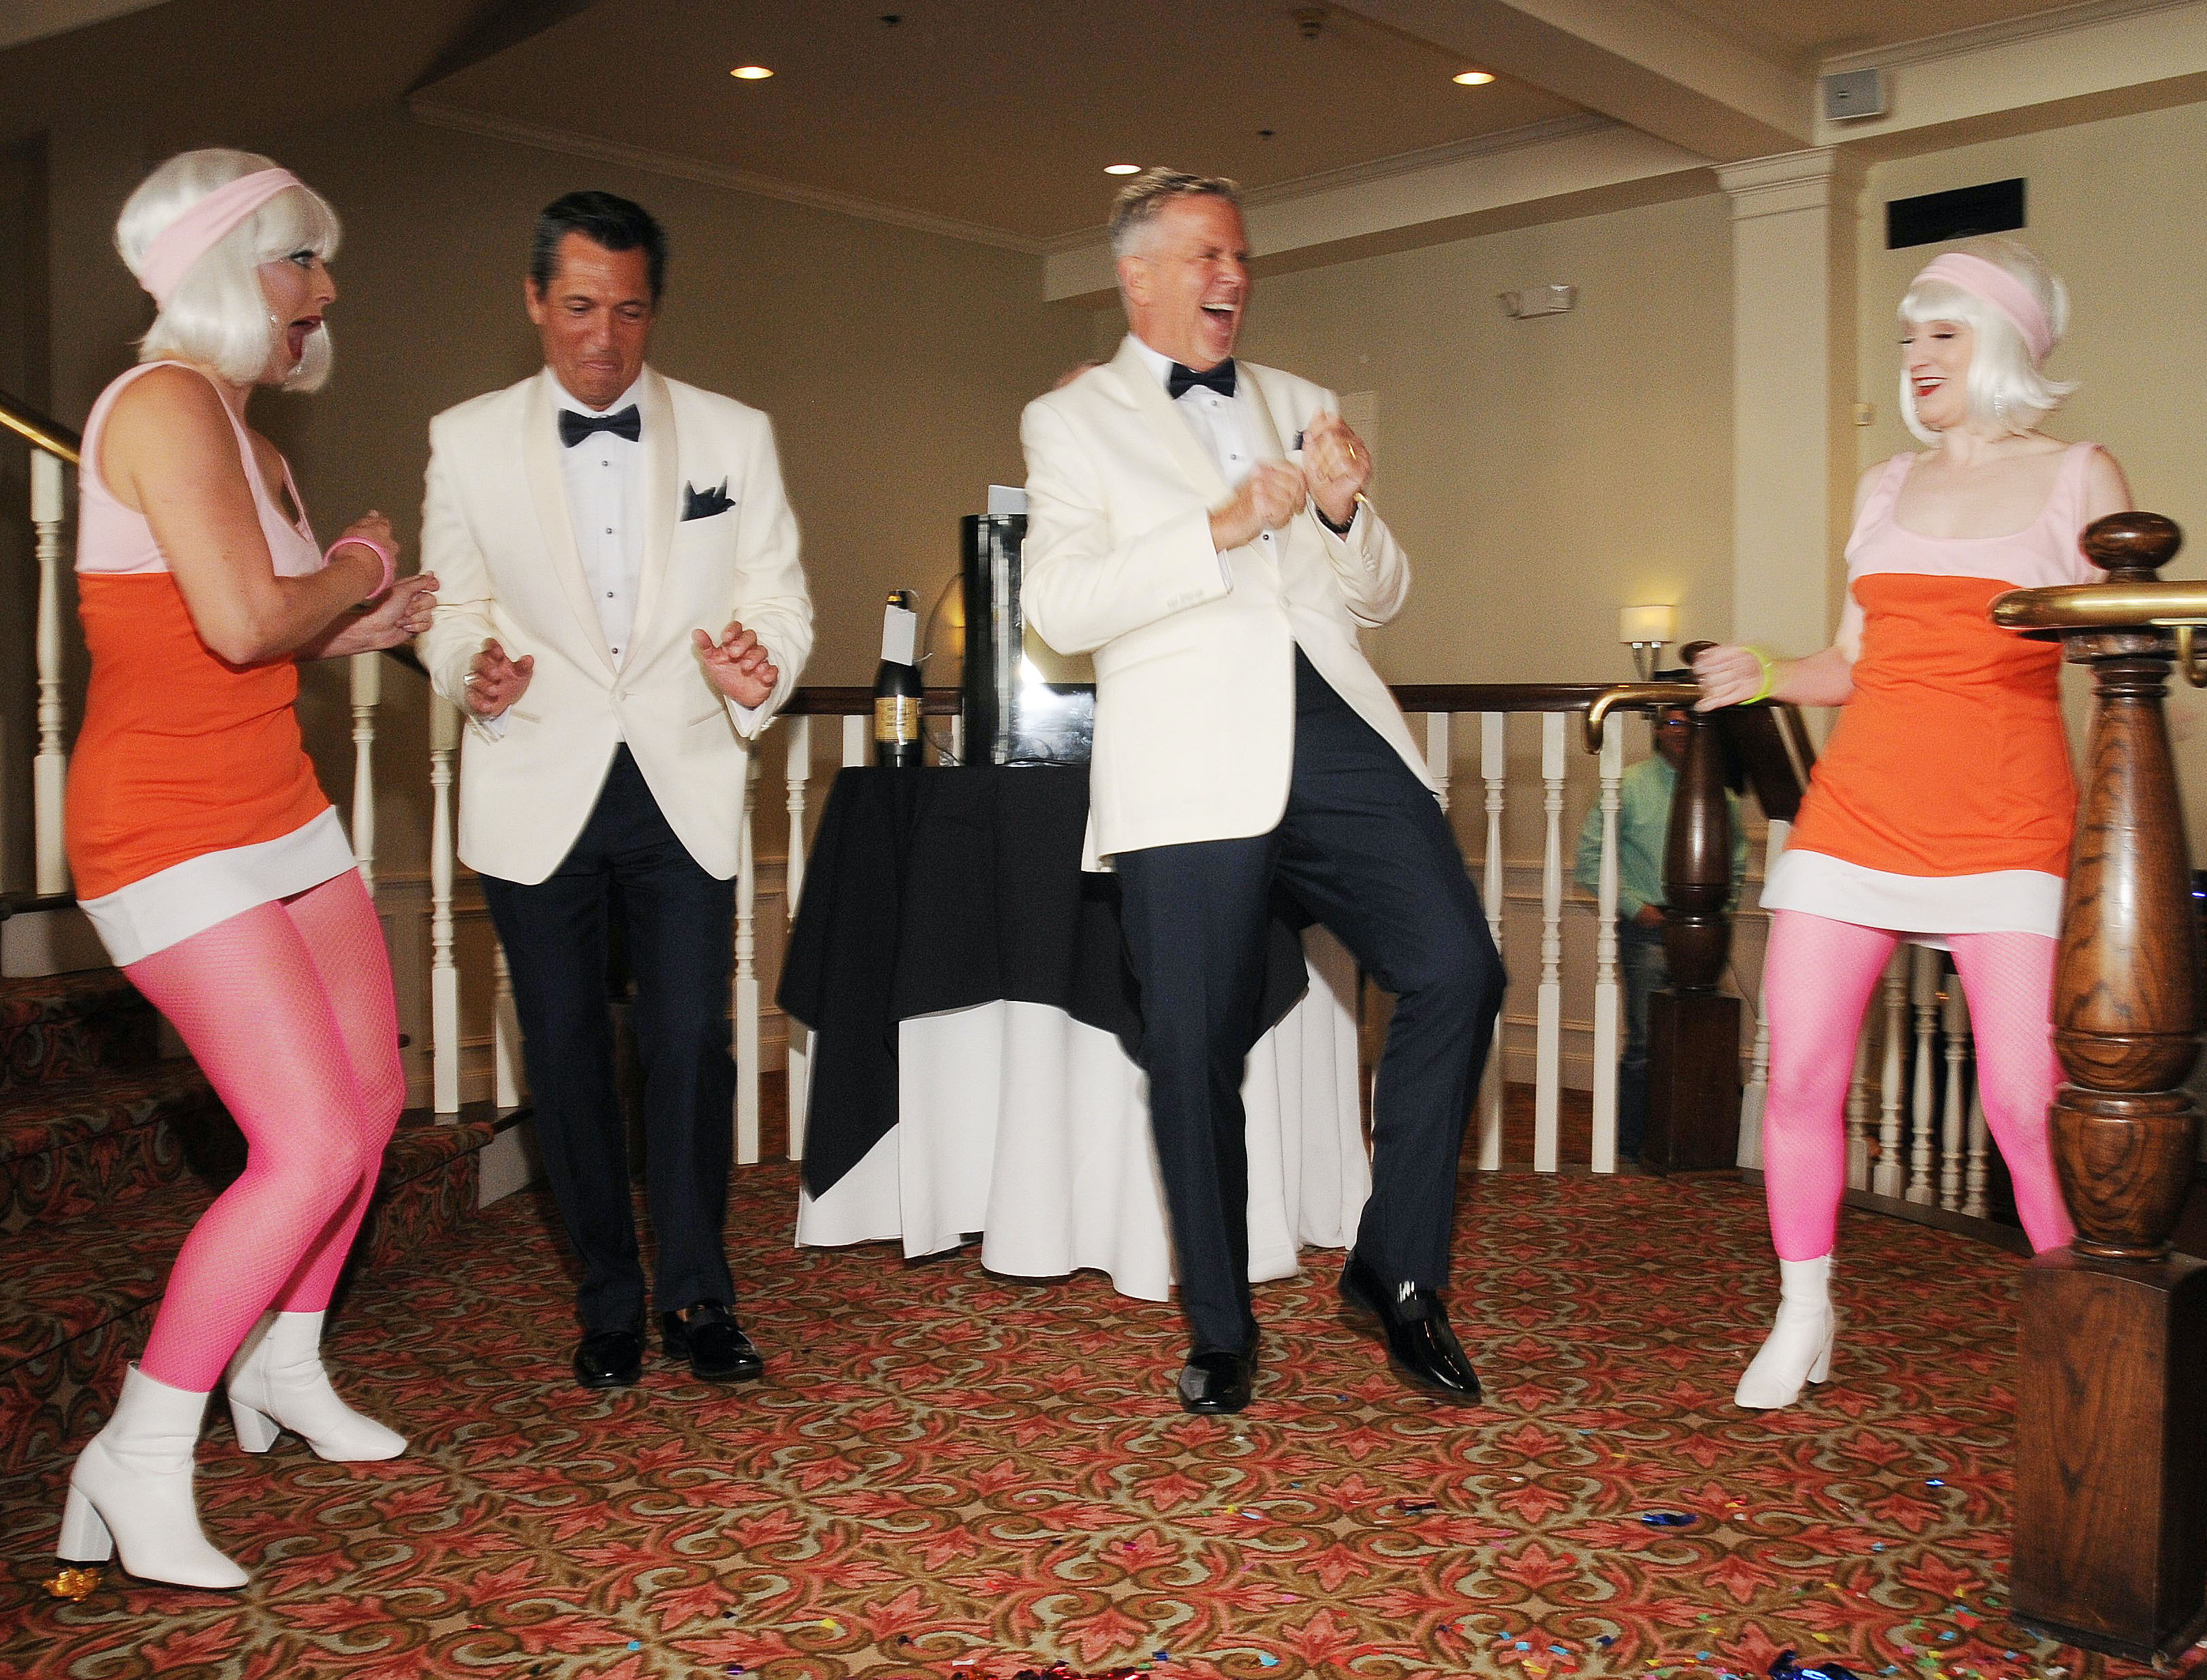 A groom and groom are surprised by Go-Go dancers at their wedding in Galveston, TX at The Tremont House Hotel.